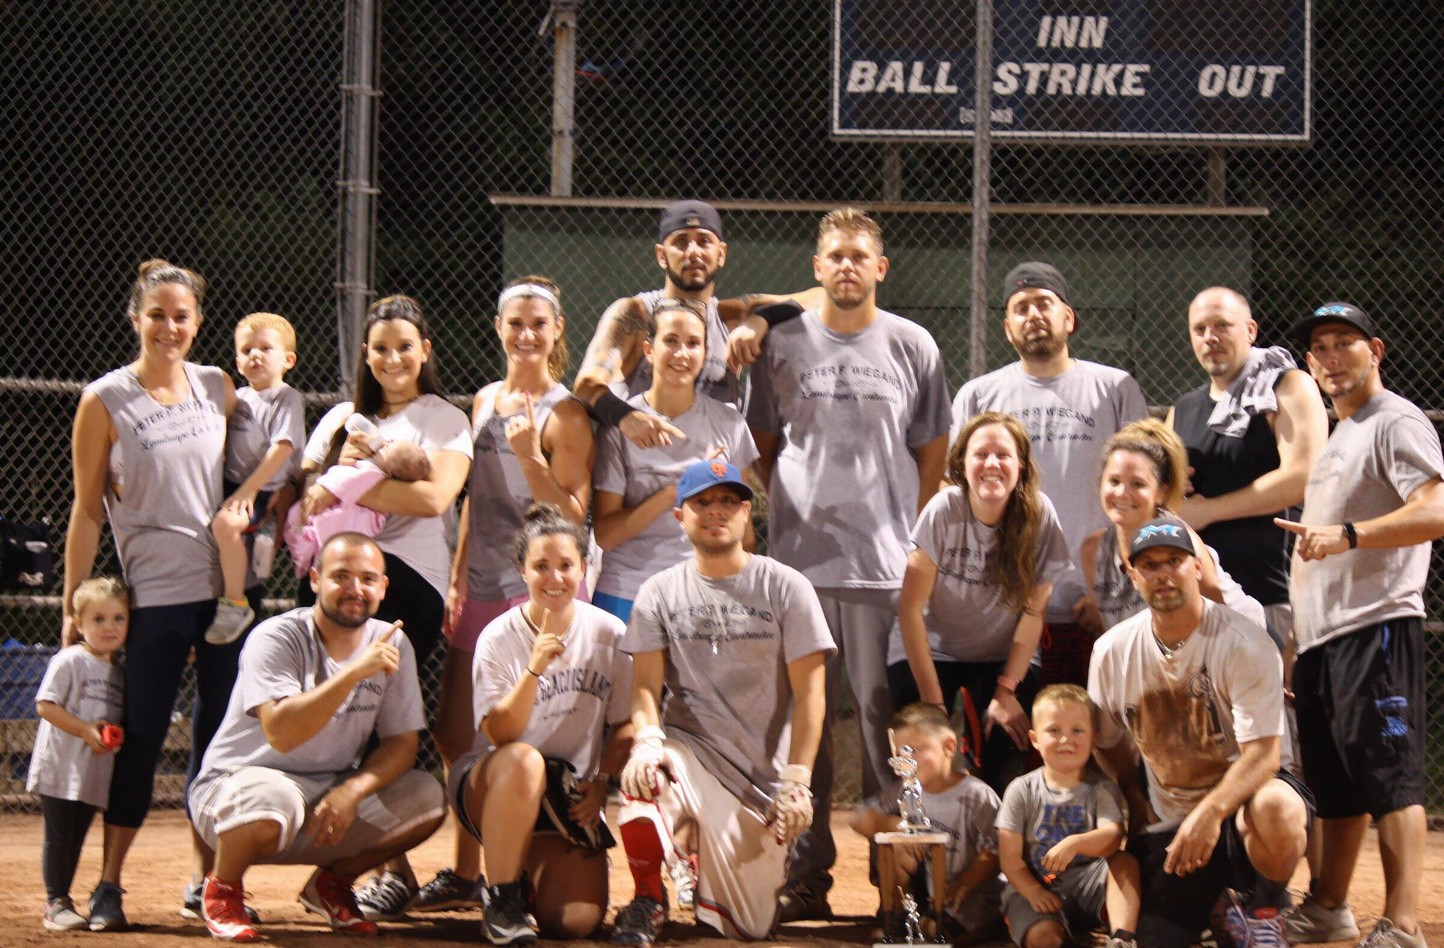 Wiegand Landscaping Co-Ed Softball Team after winning the Town Co-Ed Softball Championship.    